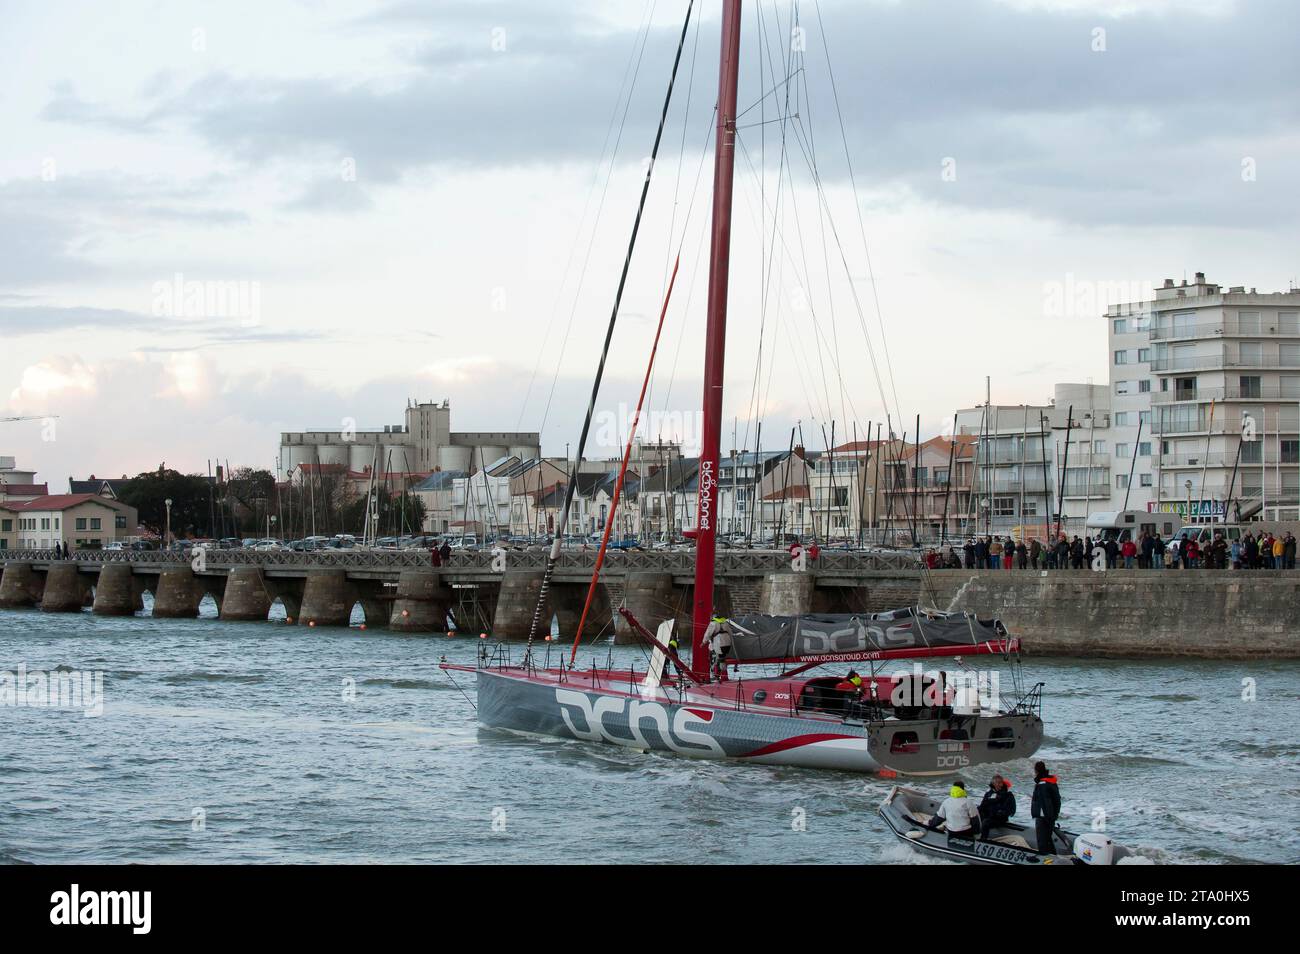 SAILING - VENDEE GLOBLE 2012-2013 - AMBIANCE PRE-START - LES SABLES D'OLONNE (FRA) - 01/11/2012 - PHOTO OLIVIER BLANCHET / DPPI - Film 'En Solitaire' - Arrival Imoca60 DCNS to Sables d'Olonne for the shooting Stock Photo